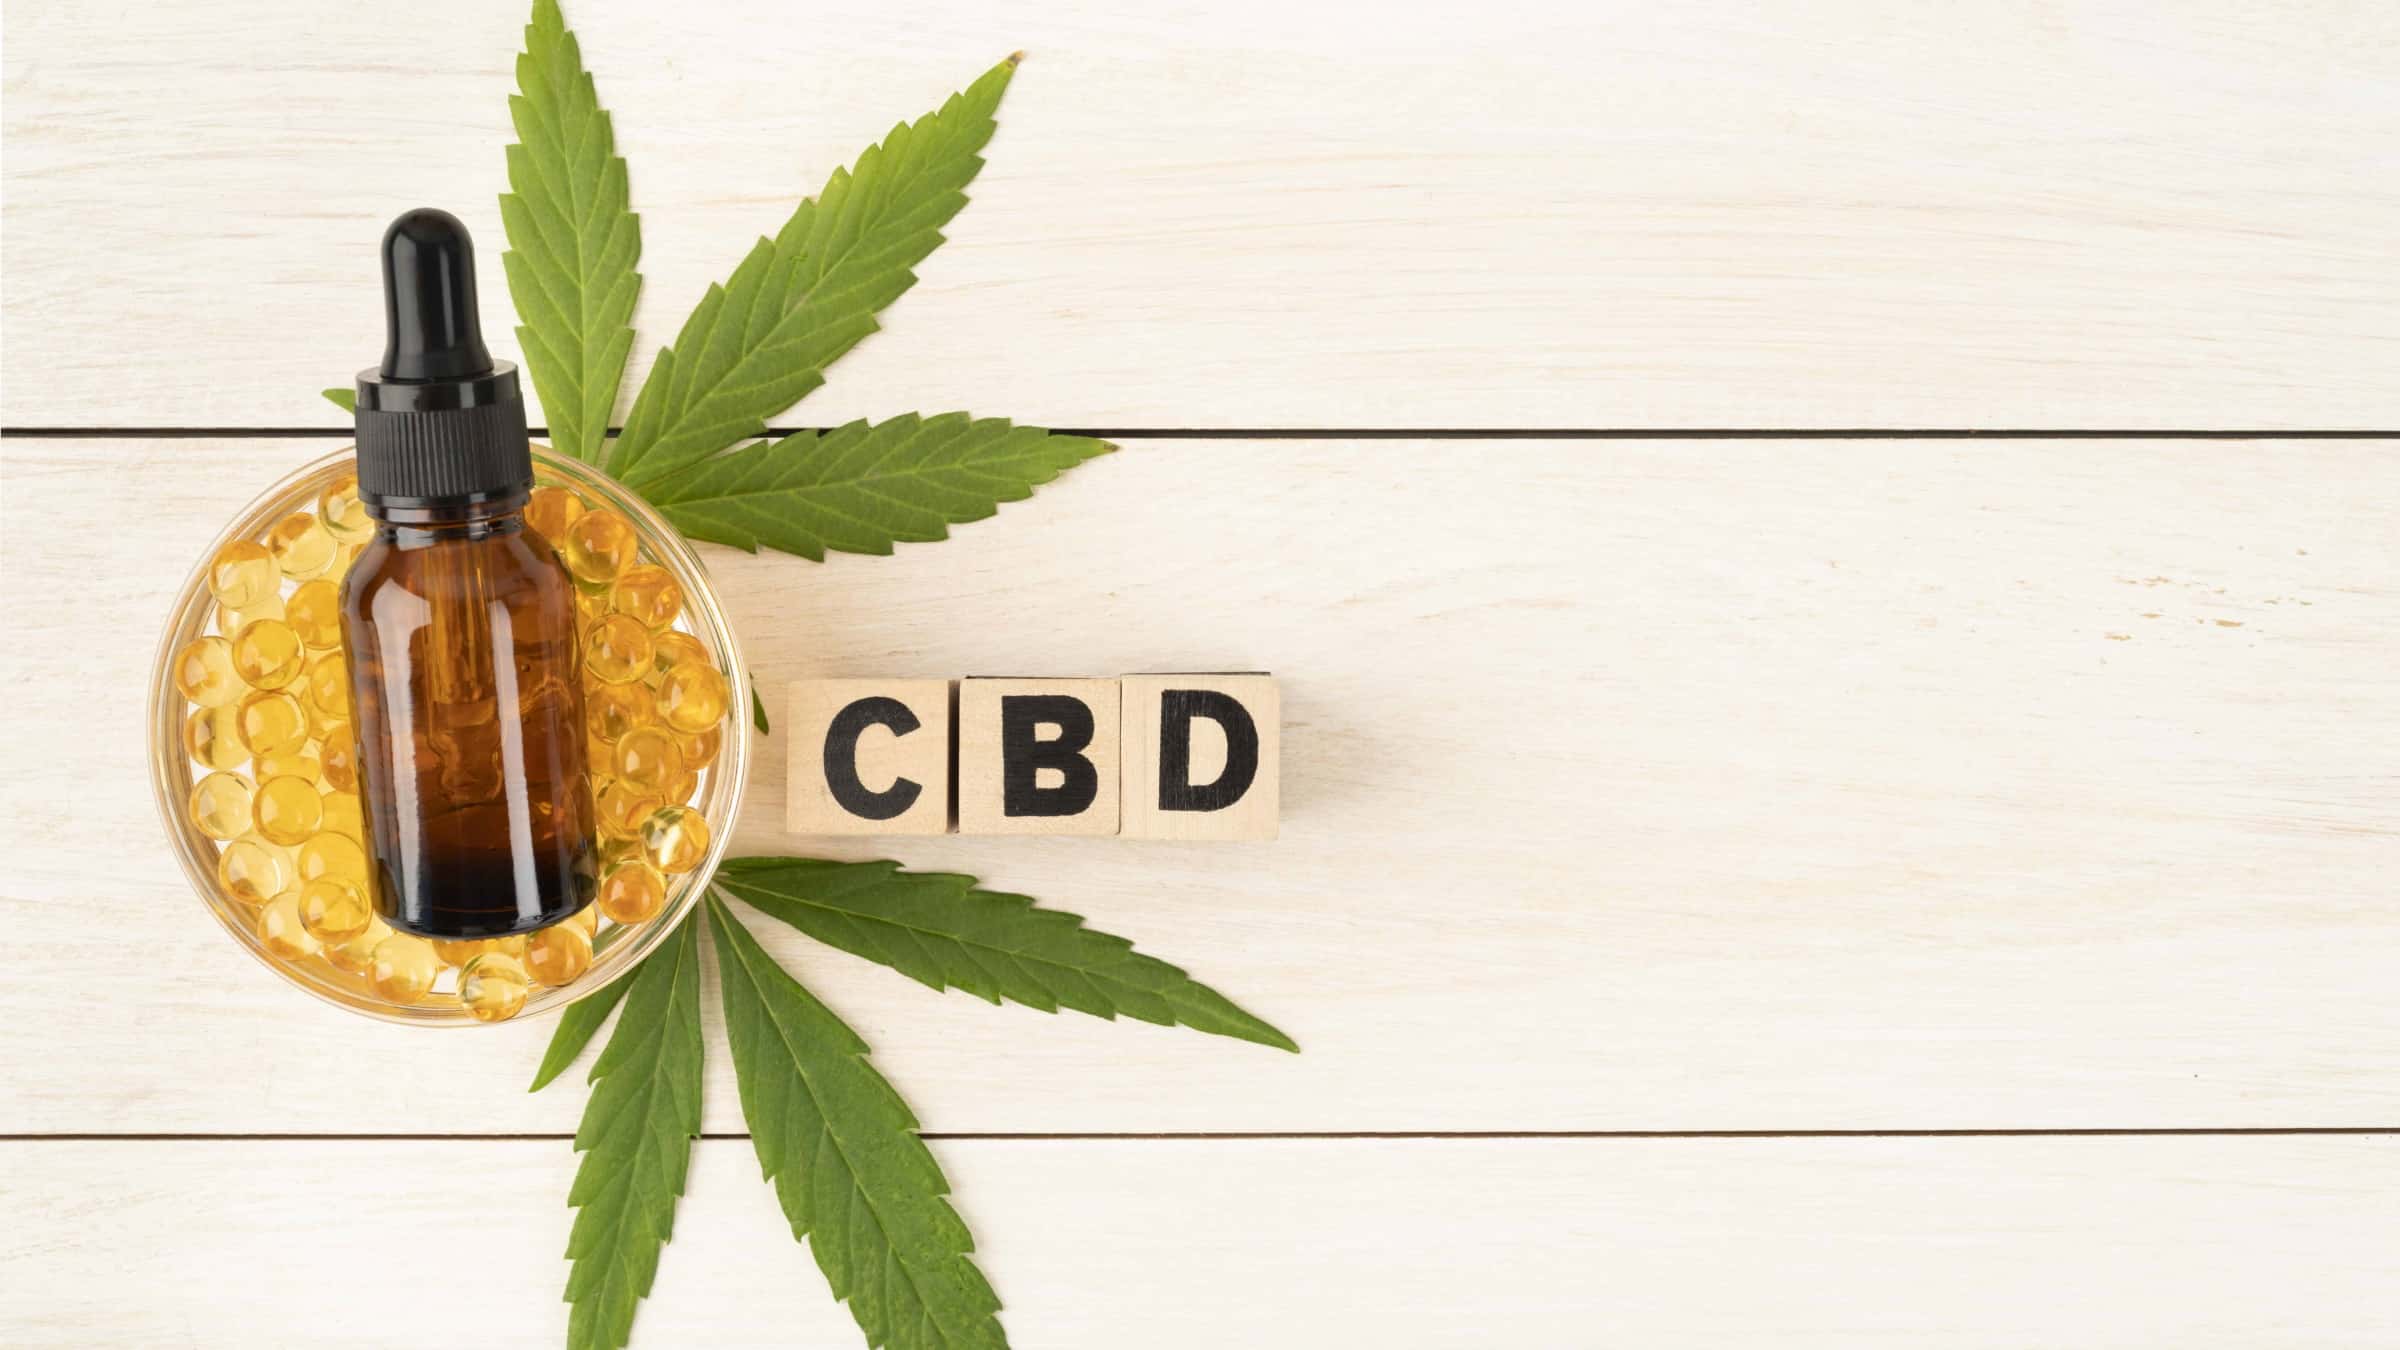 What is CBD used for?